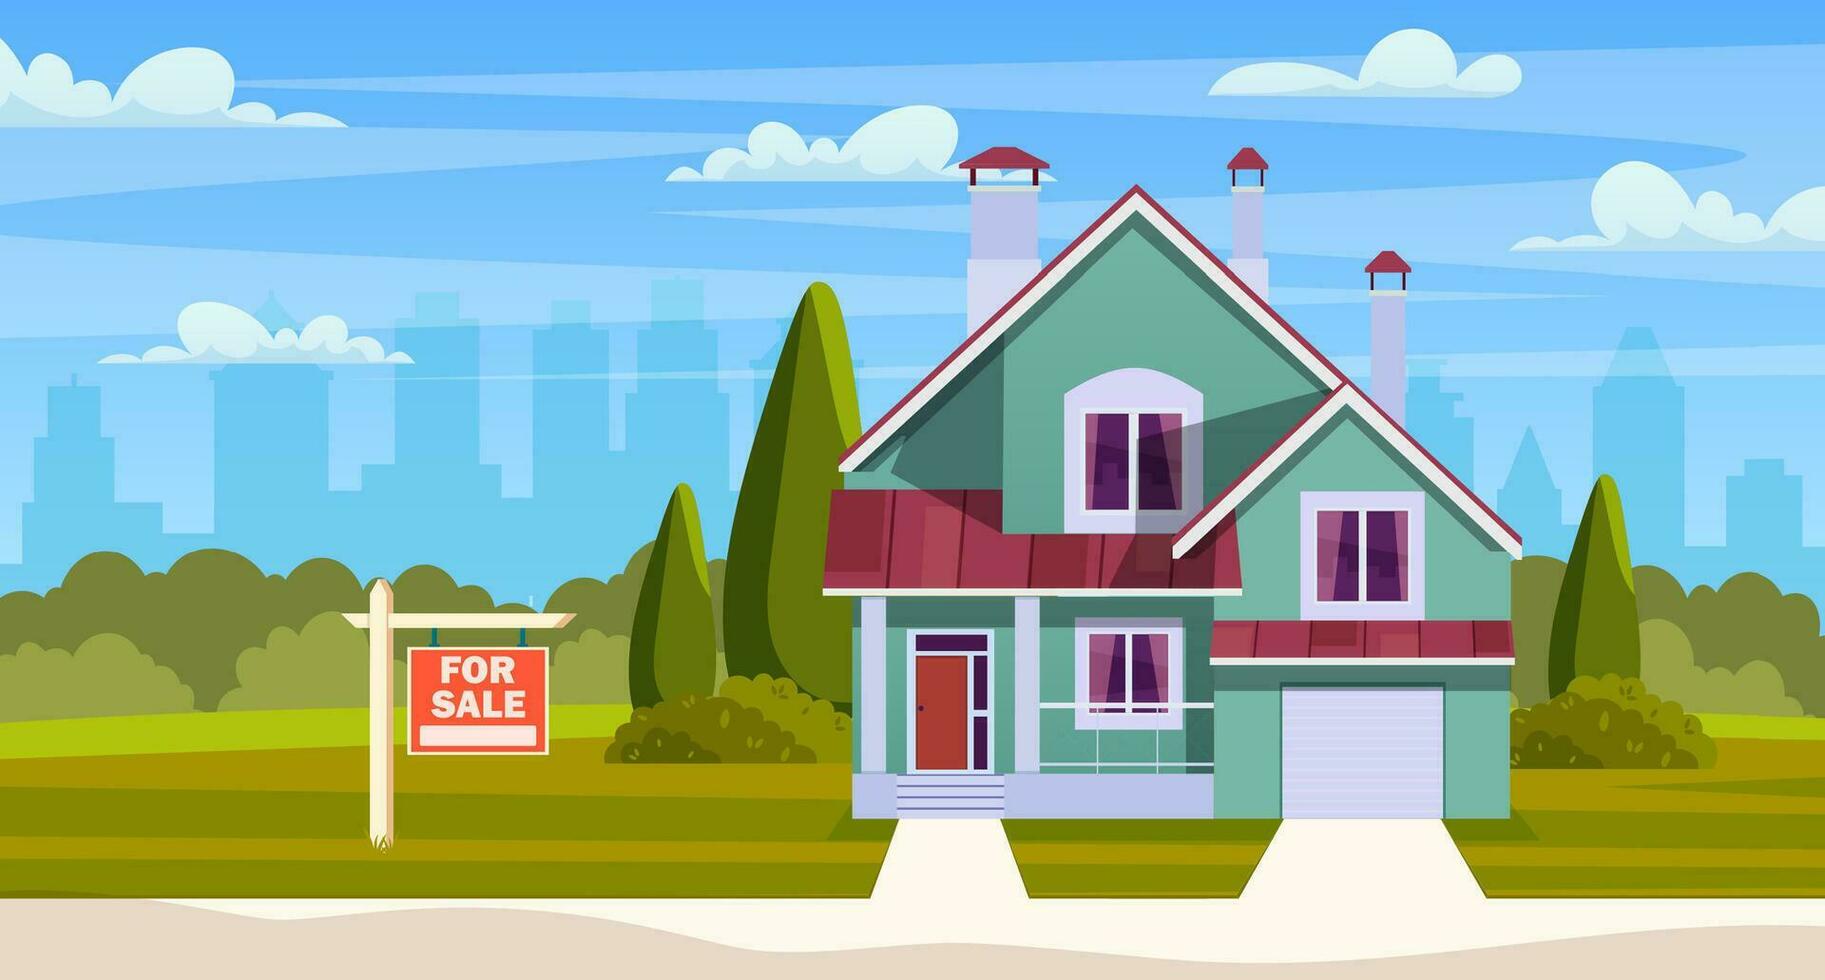 Real estate concept. House for sale. Suburban house with sign for sale and garage. cartoon residential cottage with cityscape on background. Vector illustration in flat style